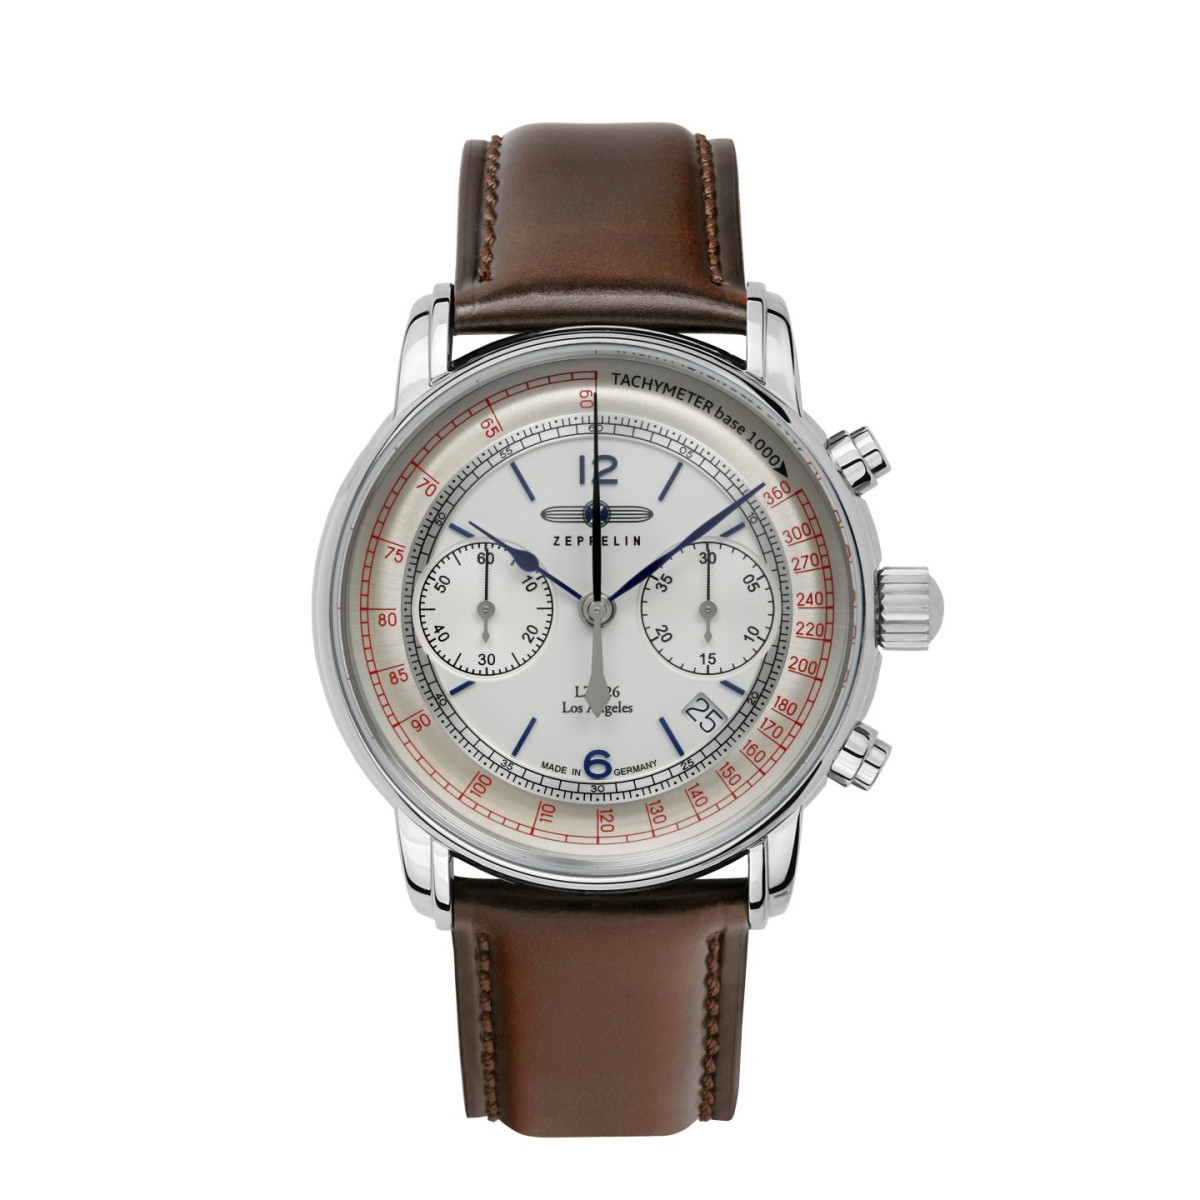 Zeppelin LZ126 Los Angeles Automatic chronograph with leather strap